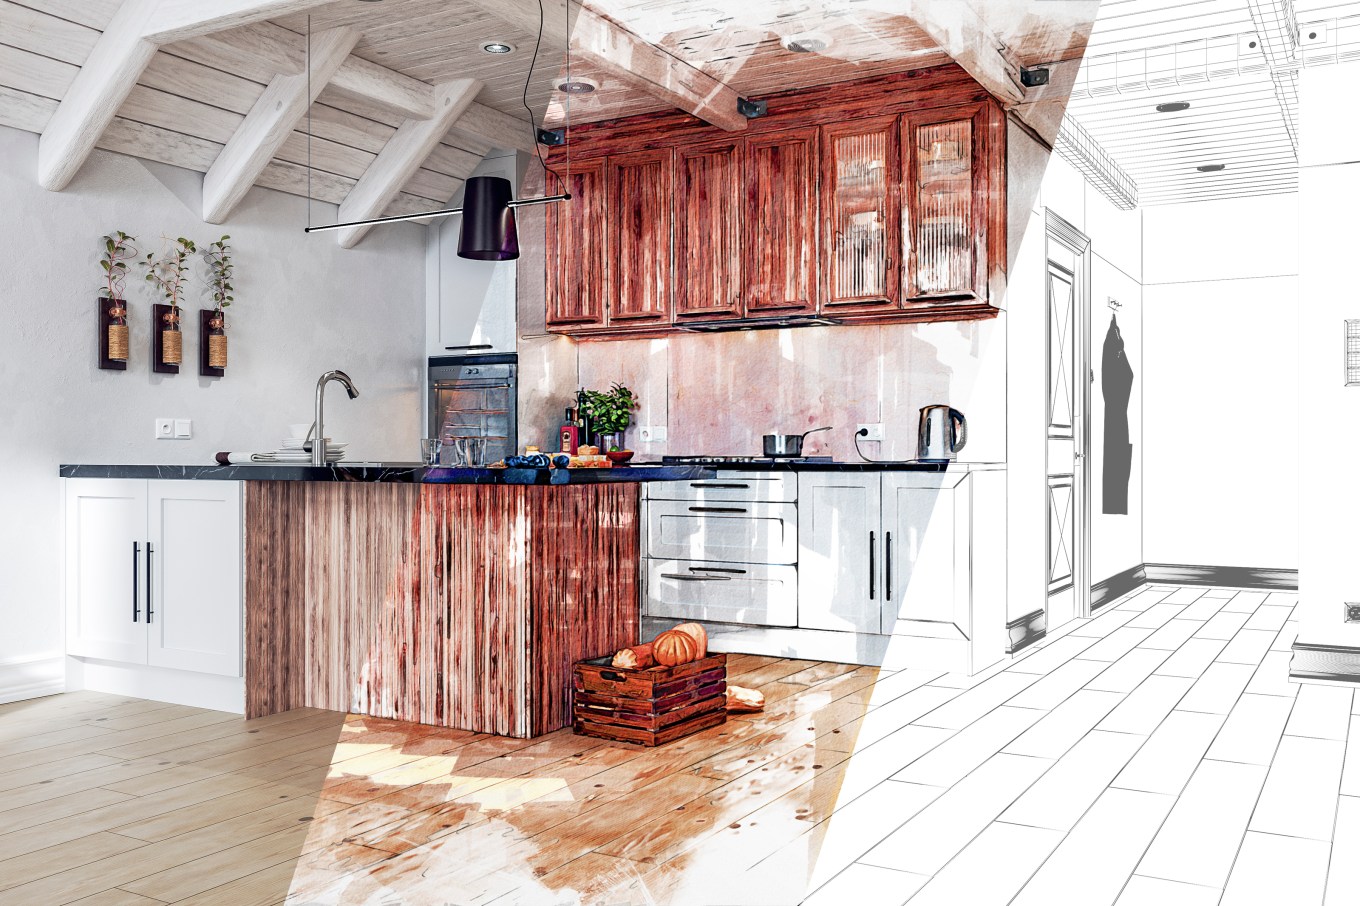 An image split into three; on the left is a modern elegant kitchen, in the middle is the a sketch with markers effect and coloring and on the right is a pencil sketch or architect's plan.